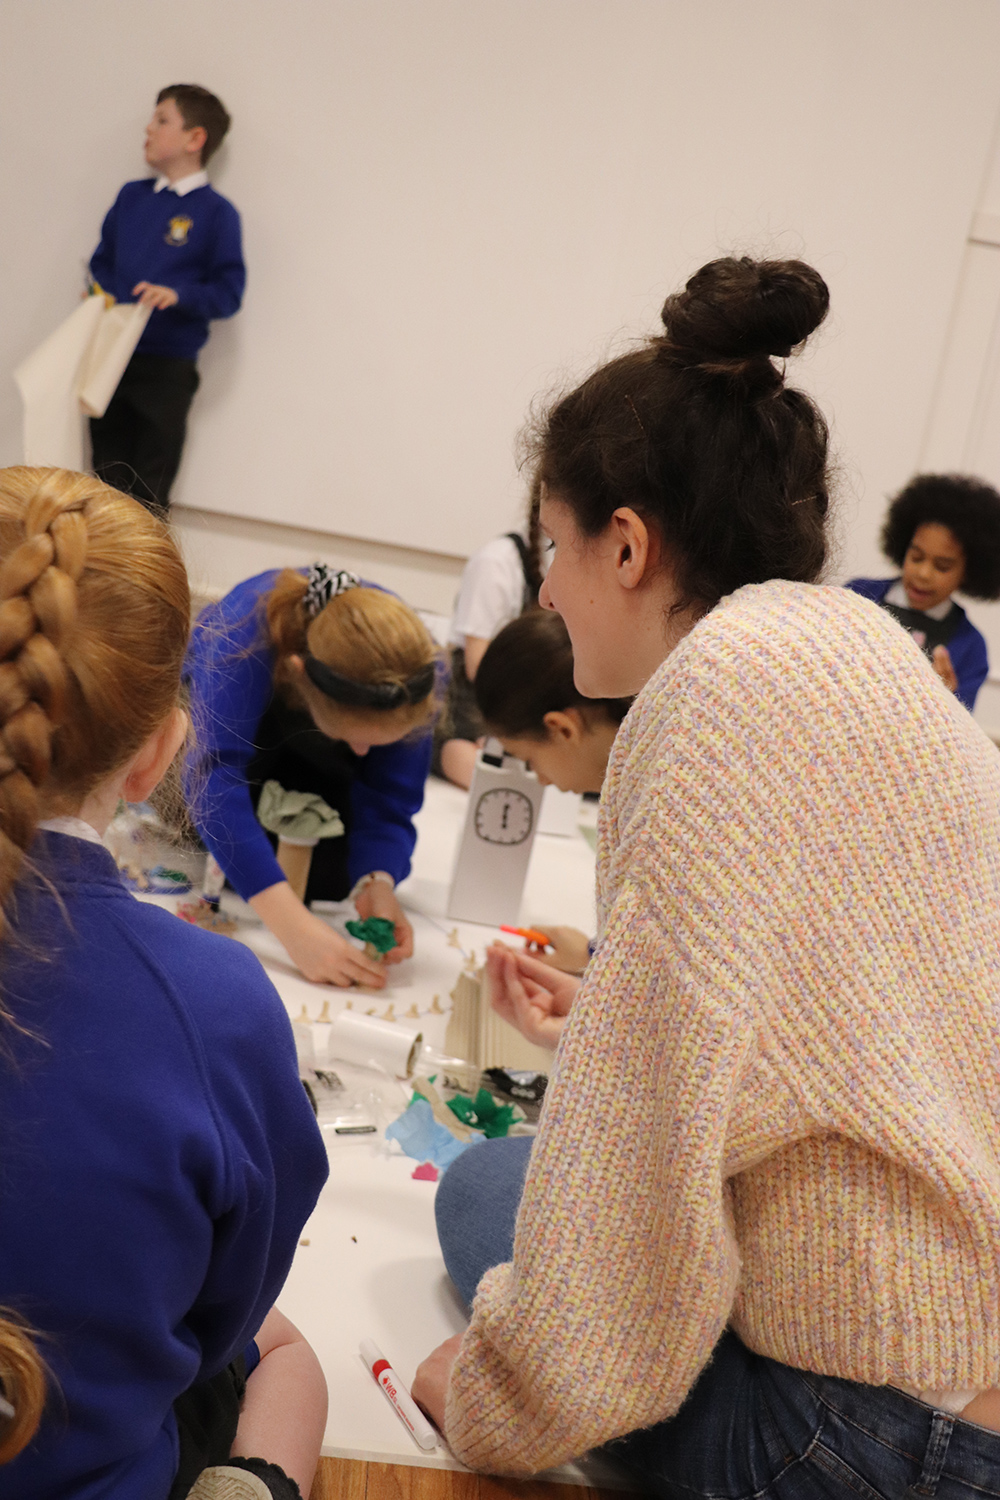 Edge Hill animation students undertaking schools workshop at Chapel Gallery